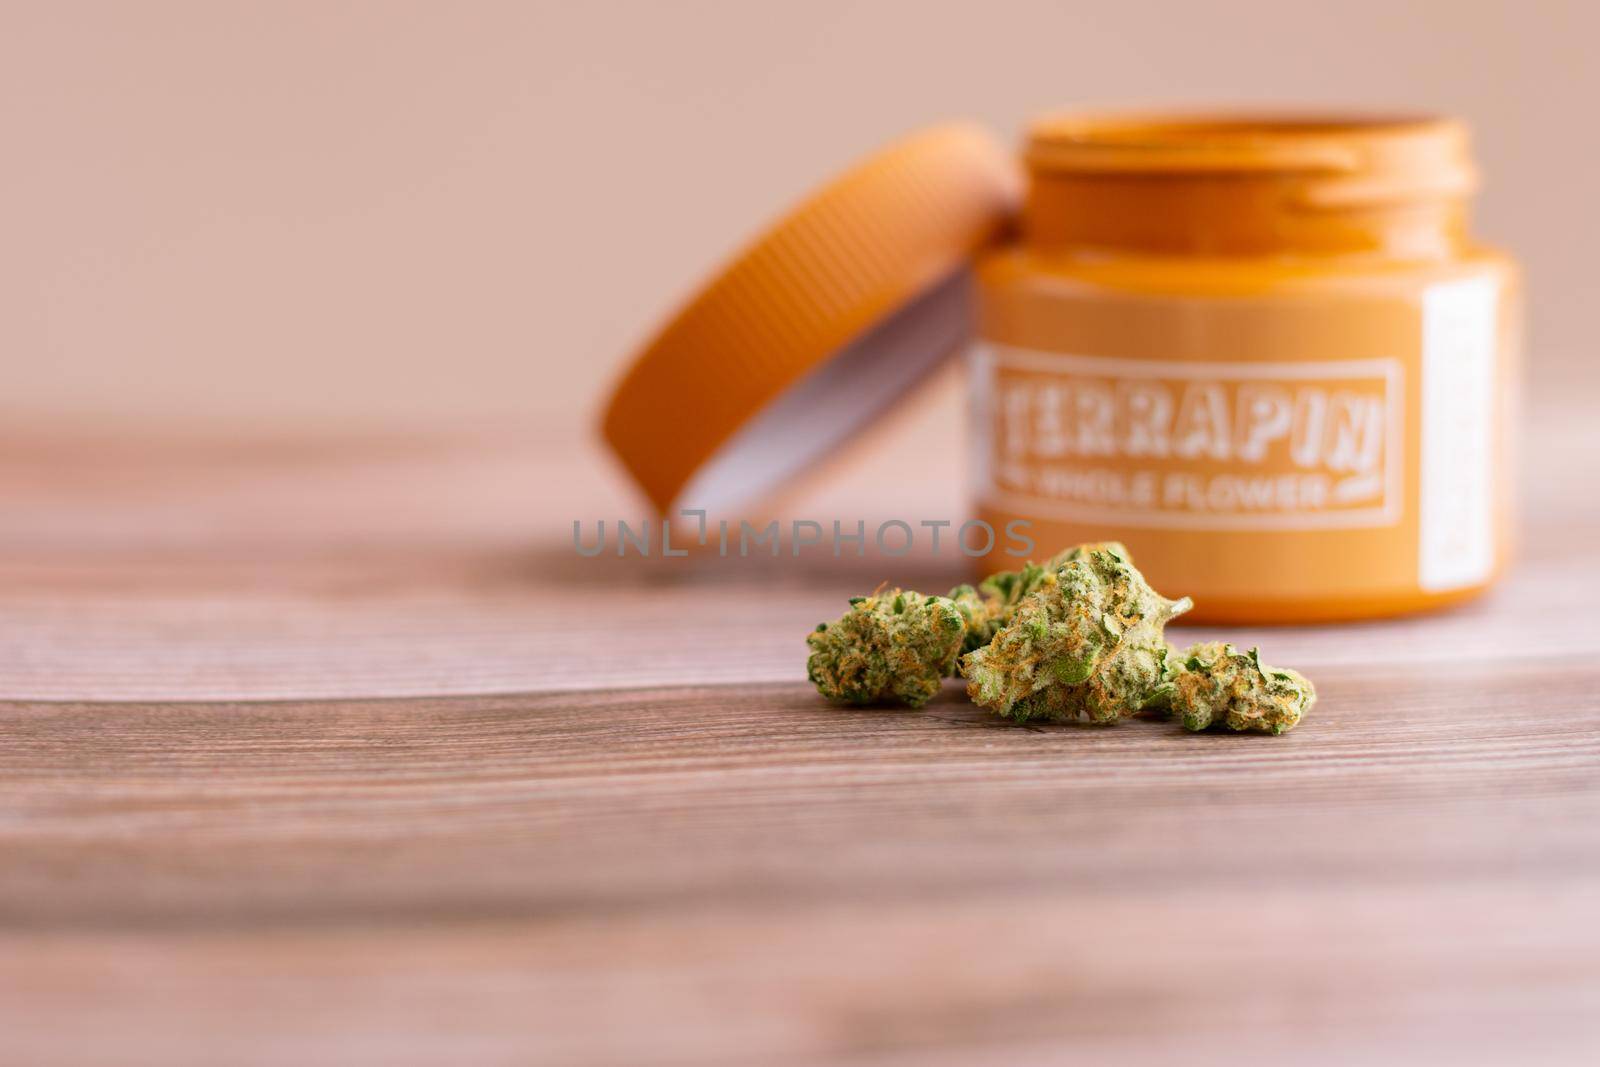 PHILADELPHIA, PA - FEBRUARY 23 2021: Devil's Lemons Medicinal Cannabis With a Terrapin Whole Flower Jar Behind It by bju12290